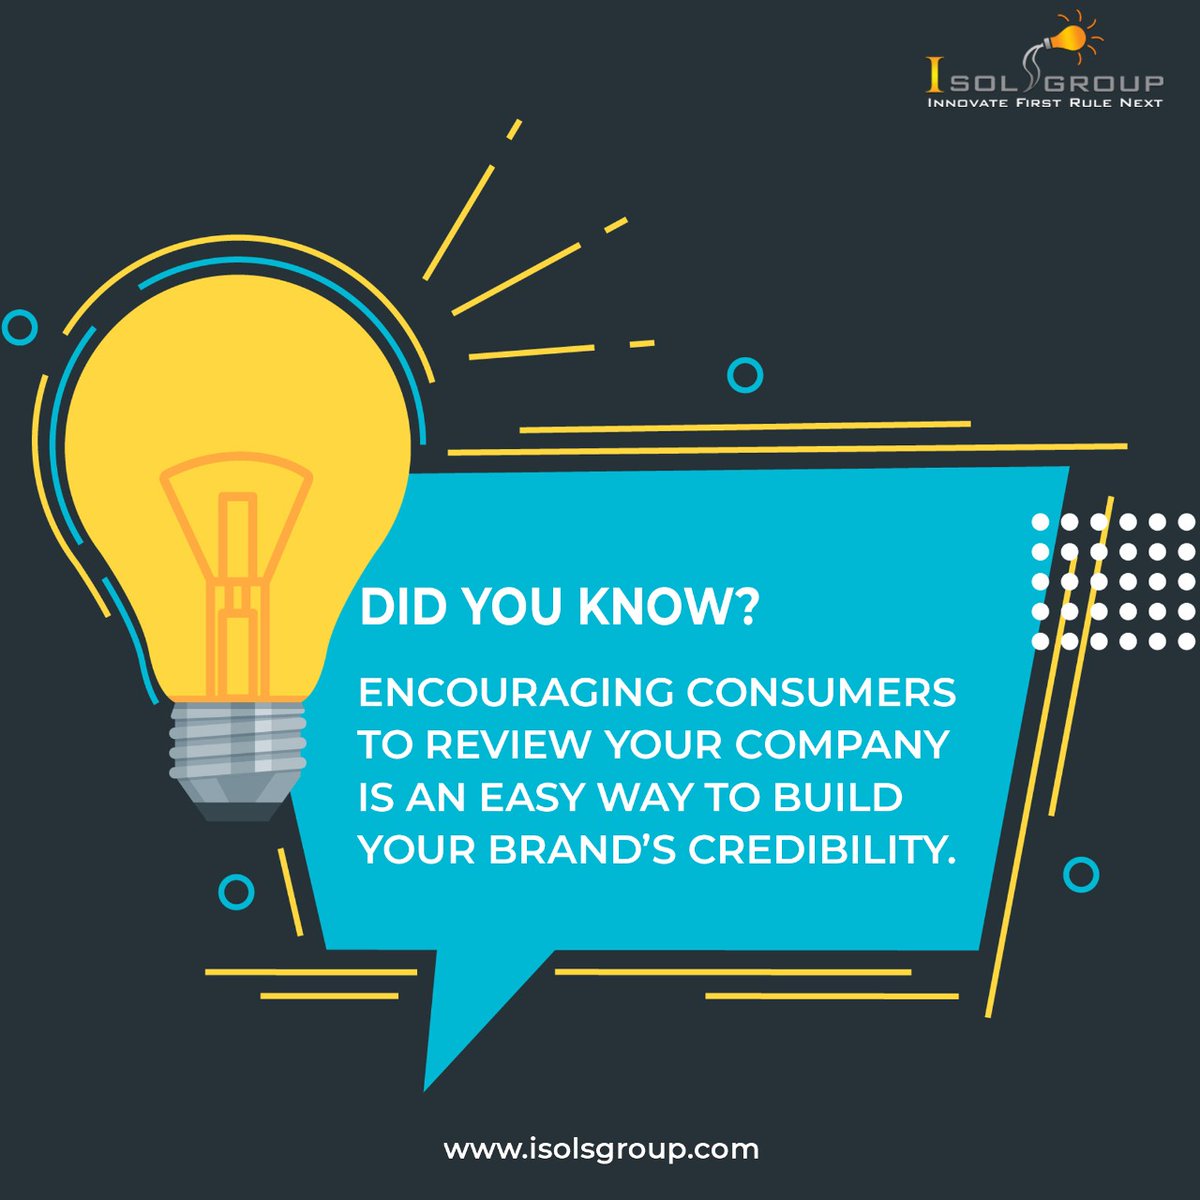 Did You Know?

Consumer Review on your company is an easy way to build brand credibility. 

.

.

.

#brand #brandcredibility #reviews #brand #isols #isolsgroup #marketing #digitalmarketing #credibility #branding #customers